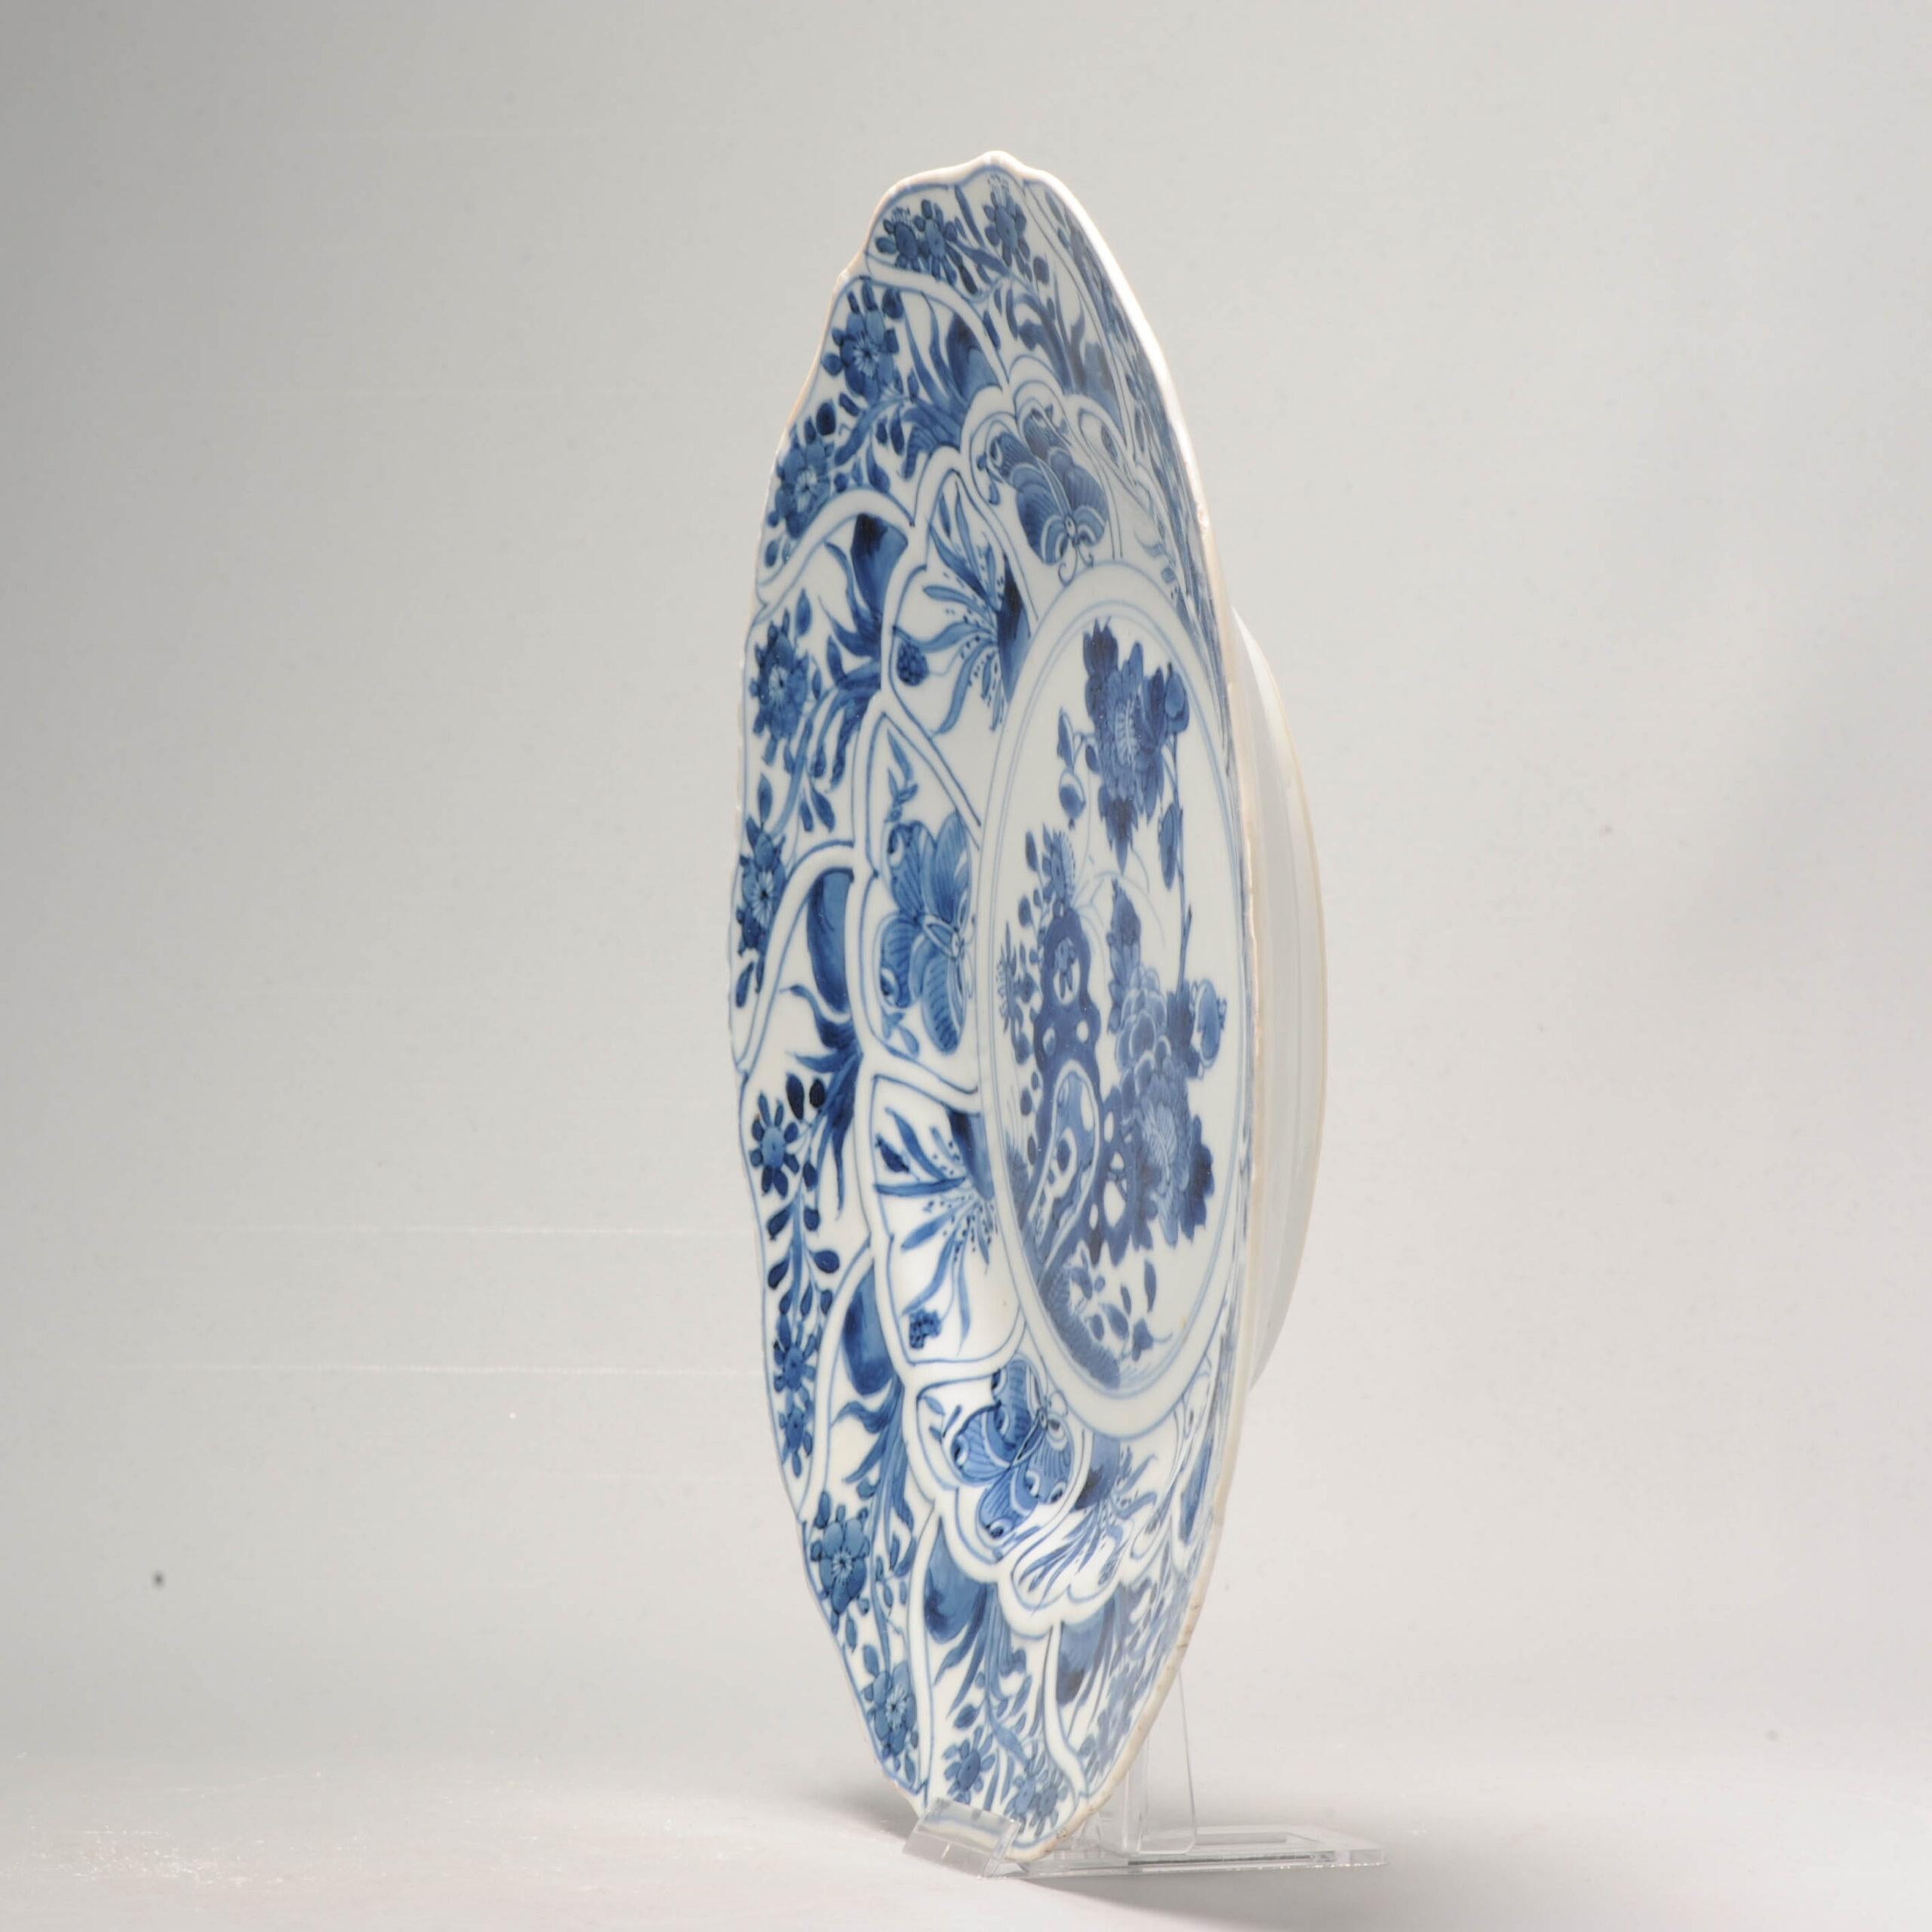 Up for sale is a stunning Kangxi period Chinese Blue and white dish, moulded into the shape of a flower. The dish features an overall scene of rocks, flowers, and butterflies, skillfully painted in dark cobalt blue colors.

This antique dish is a